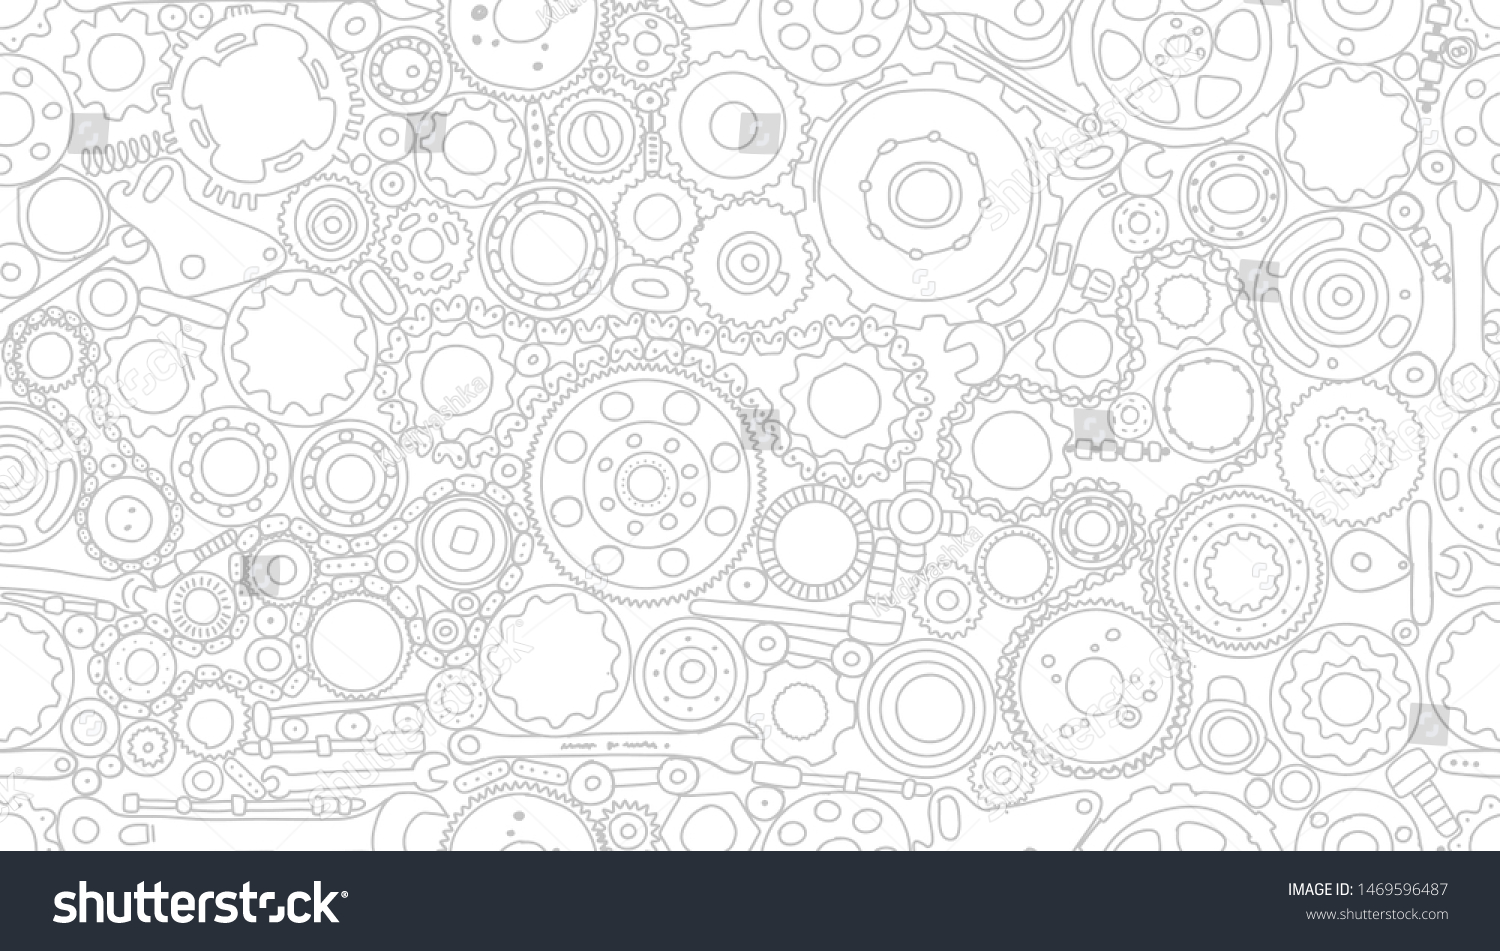 SVG of Auto spare parts and gears, seamless pattern for your design svg